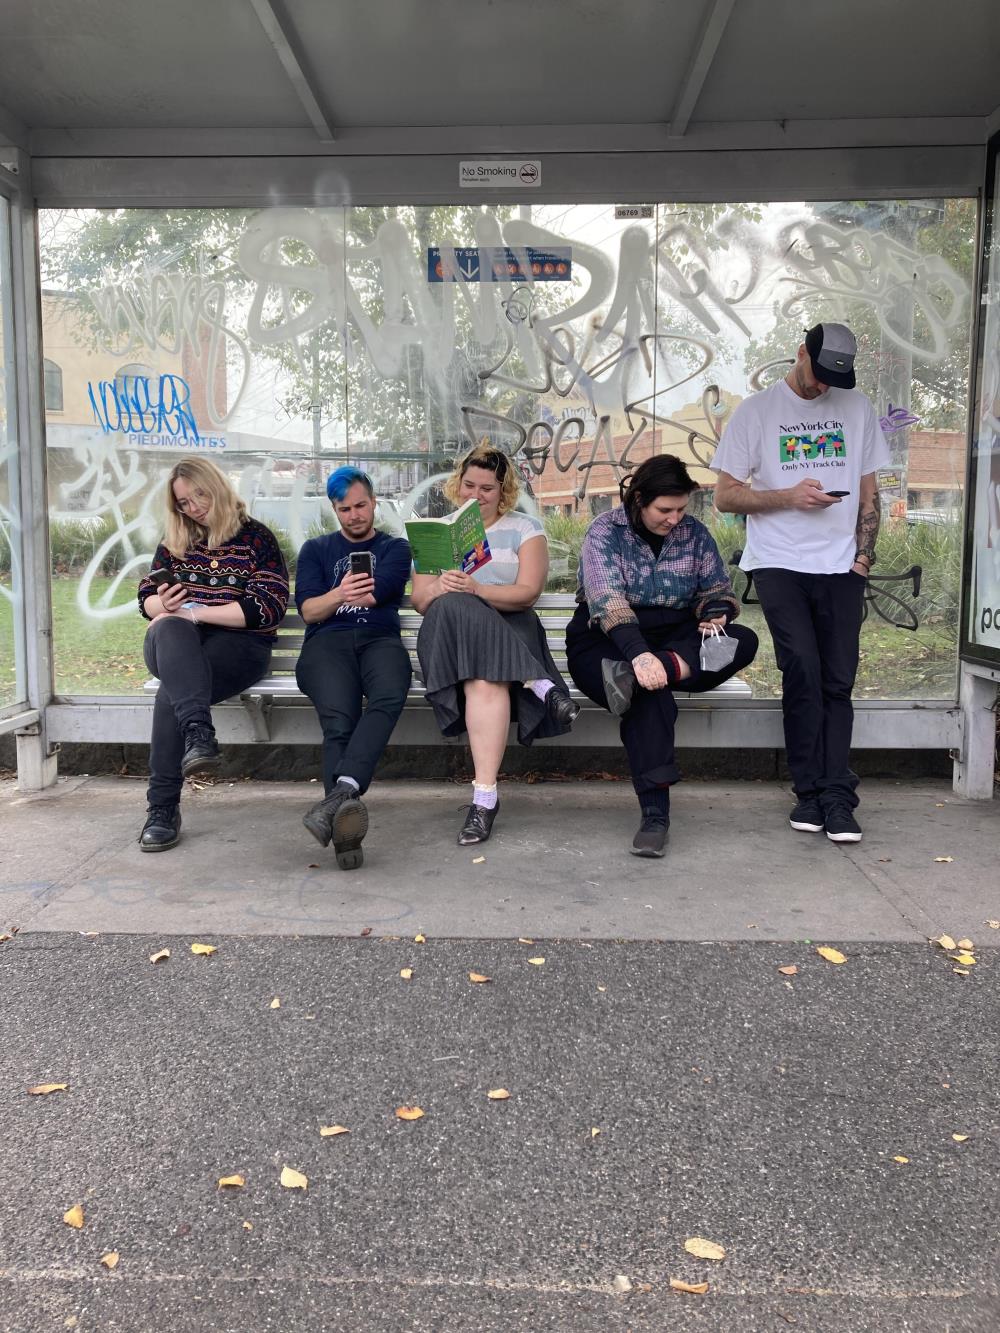 A group of five young people sit at a tram stop, all glued to their phones, except for the person in the middle who is reading a book